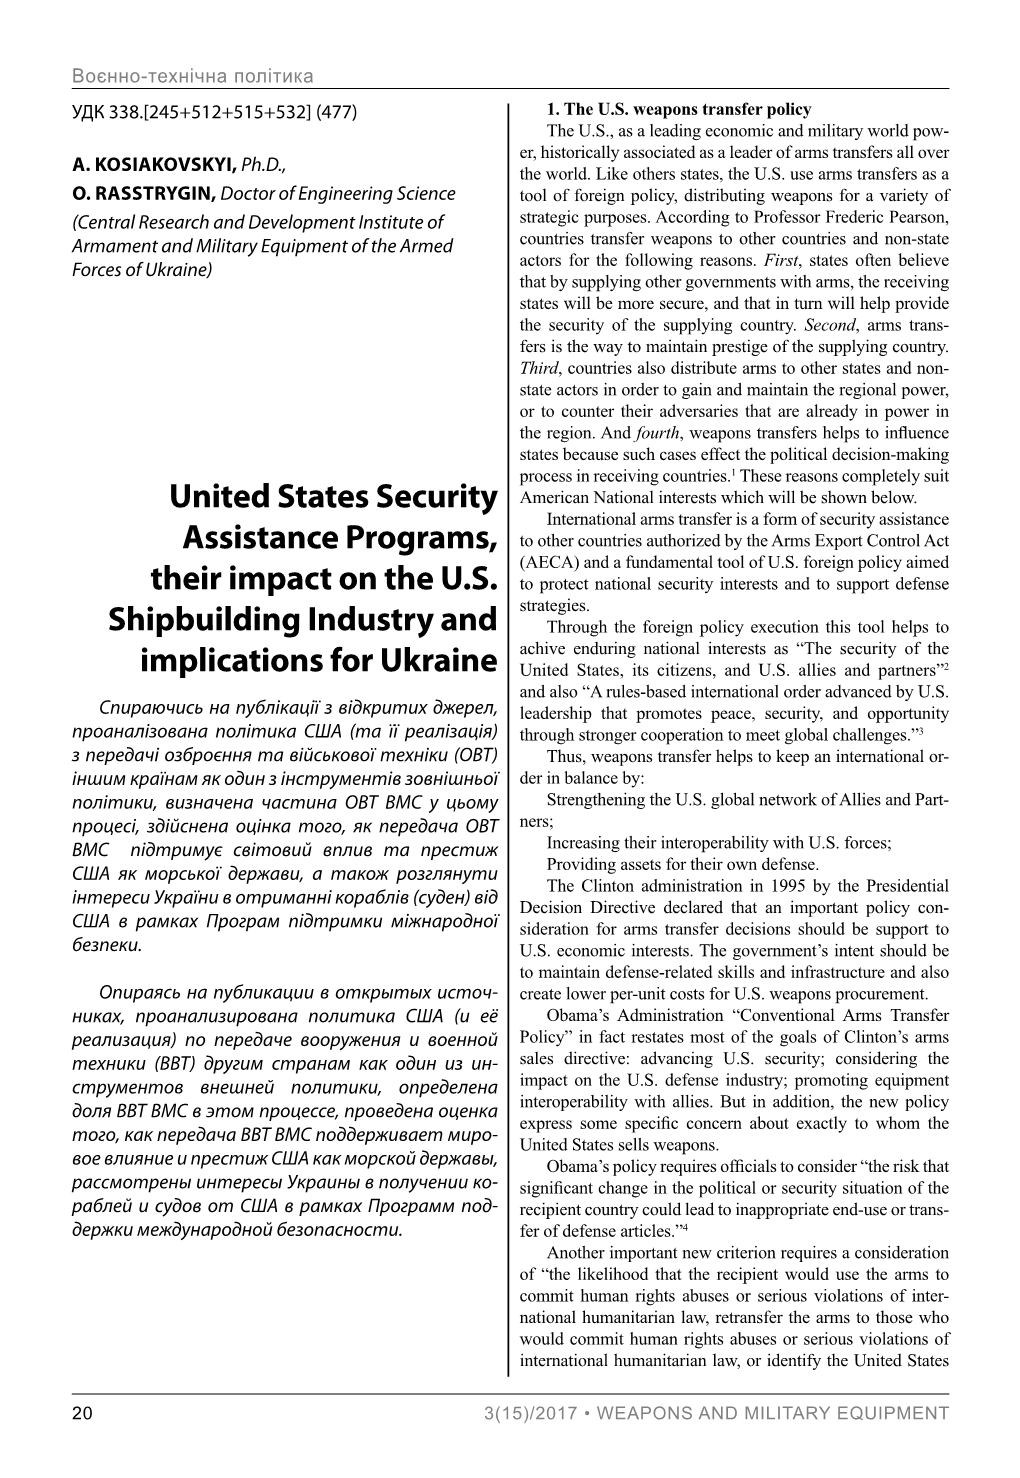 United States Security Assistance Programs, Their Impact on the U.S